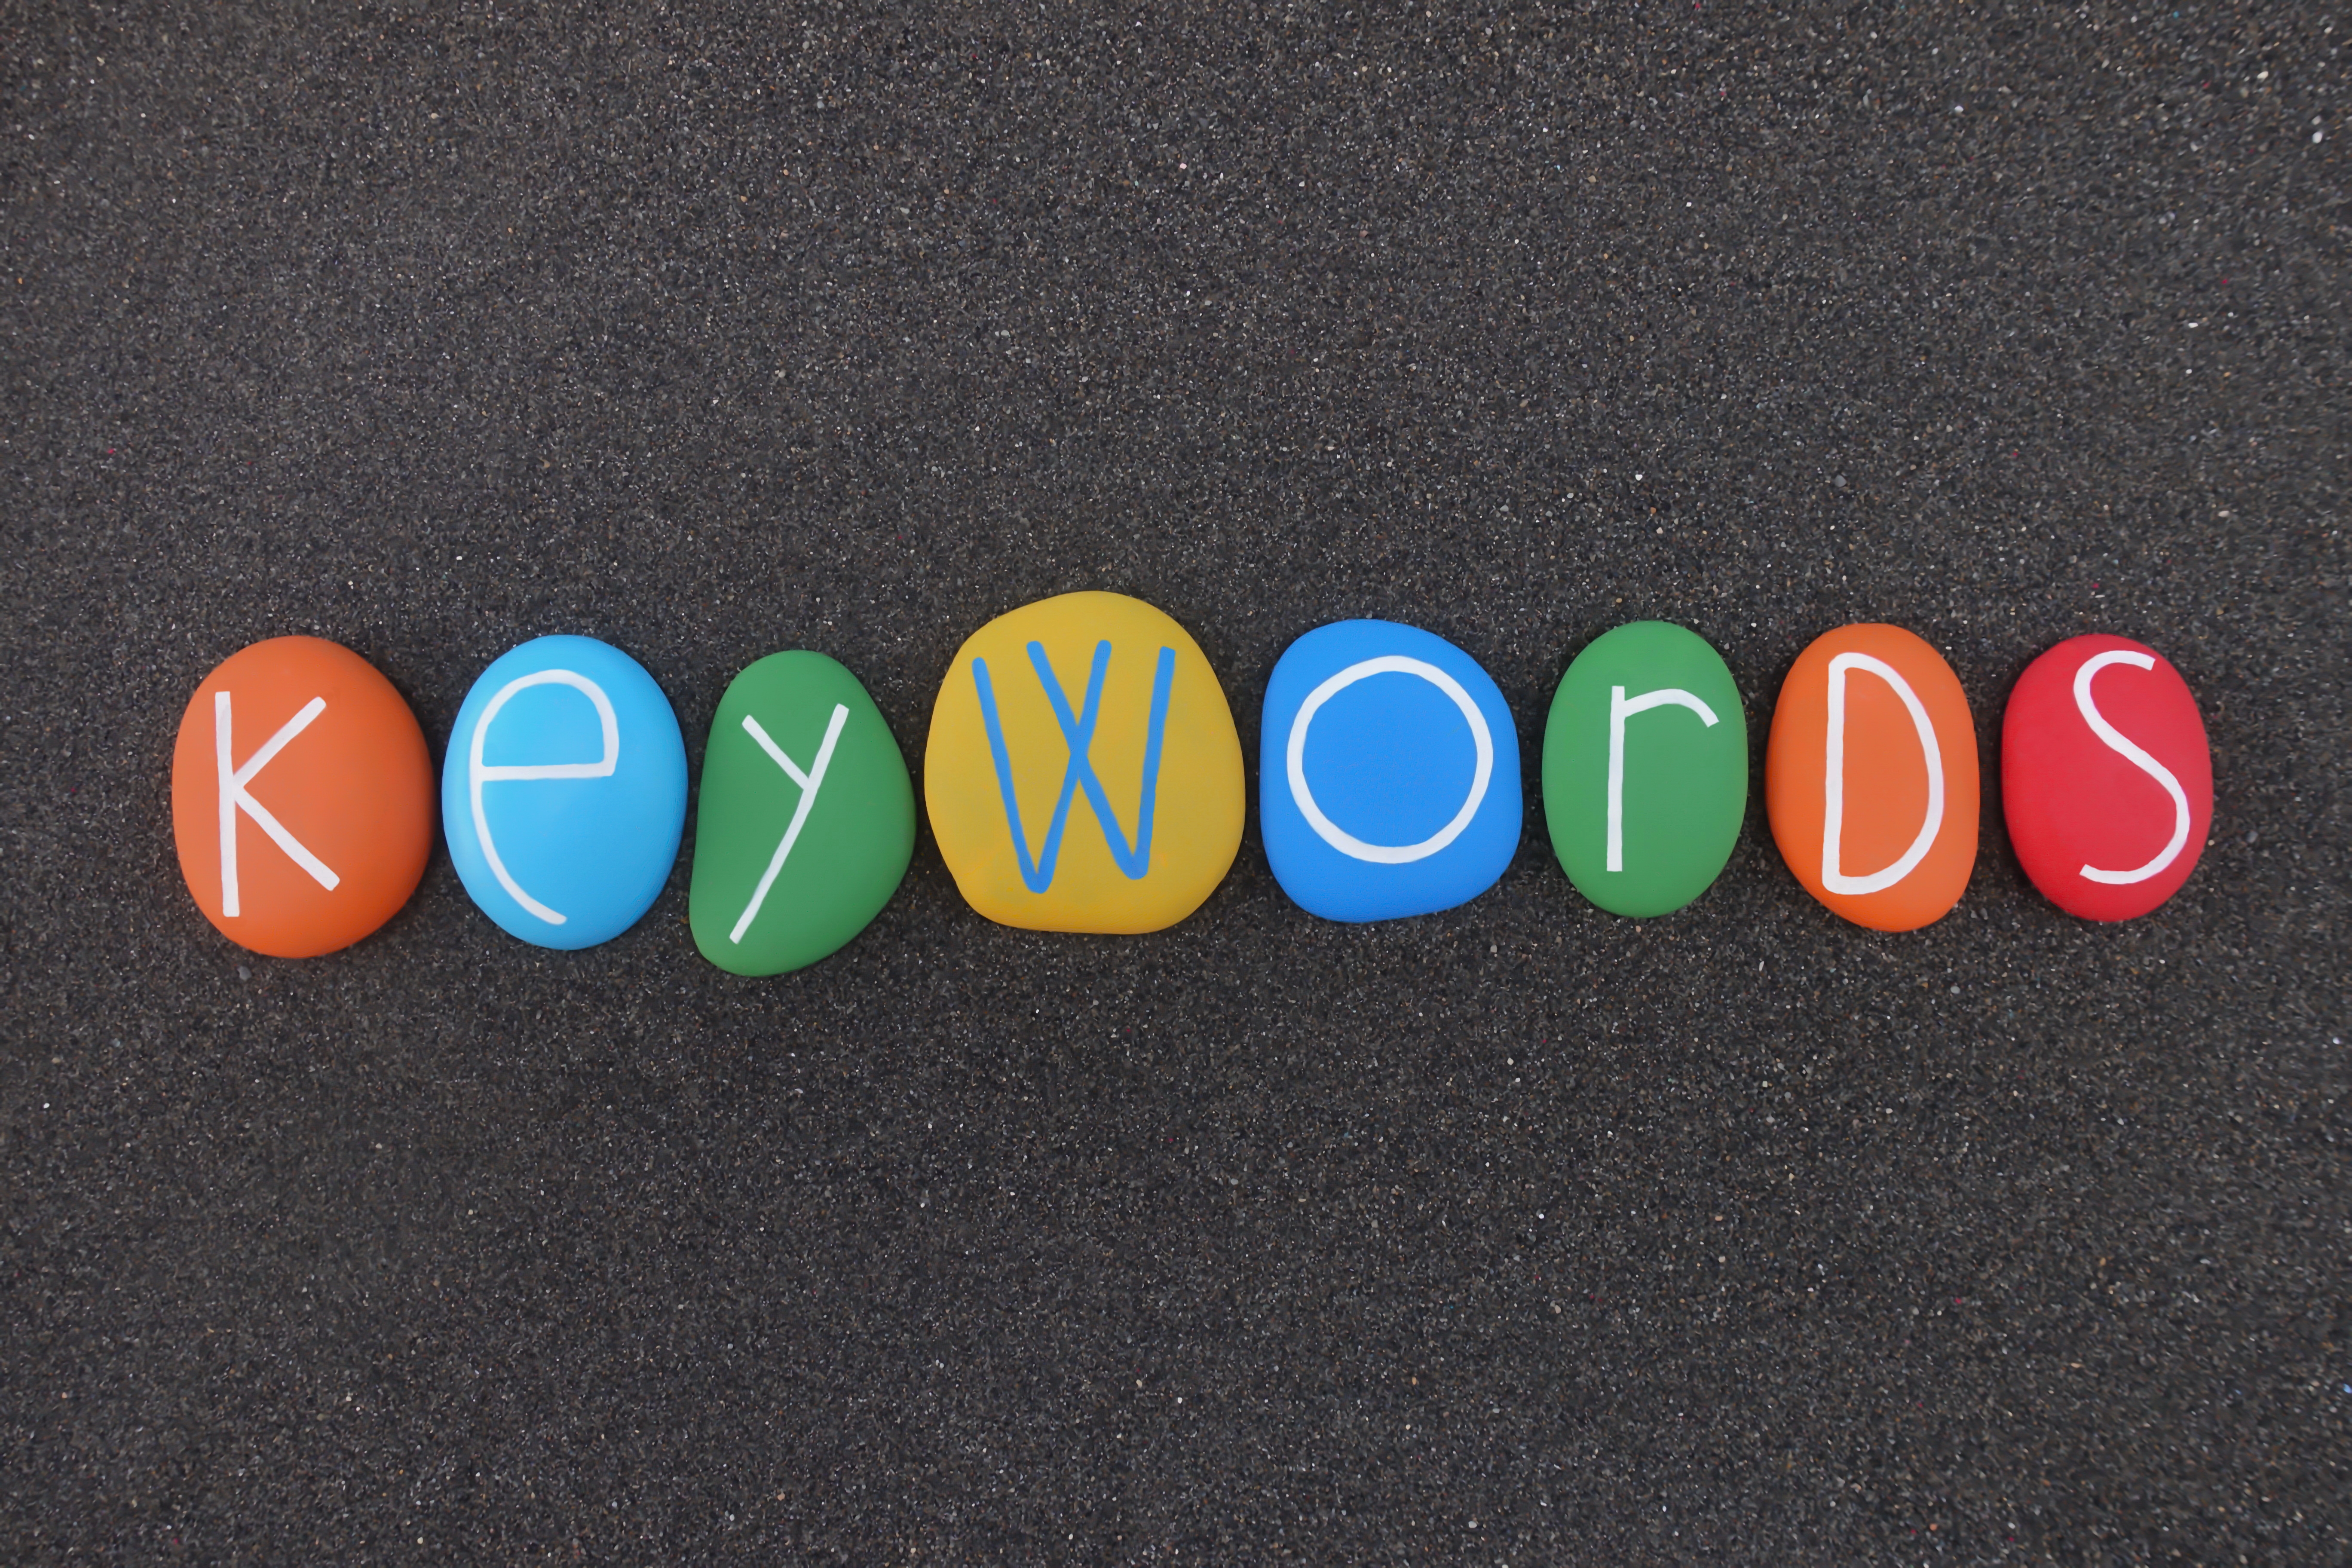 How to Use Keywords to Optimize Your Website